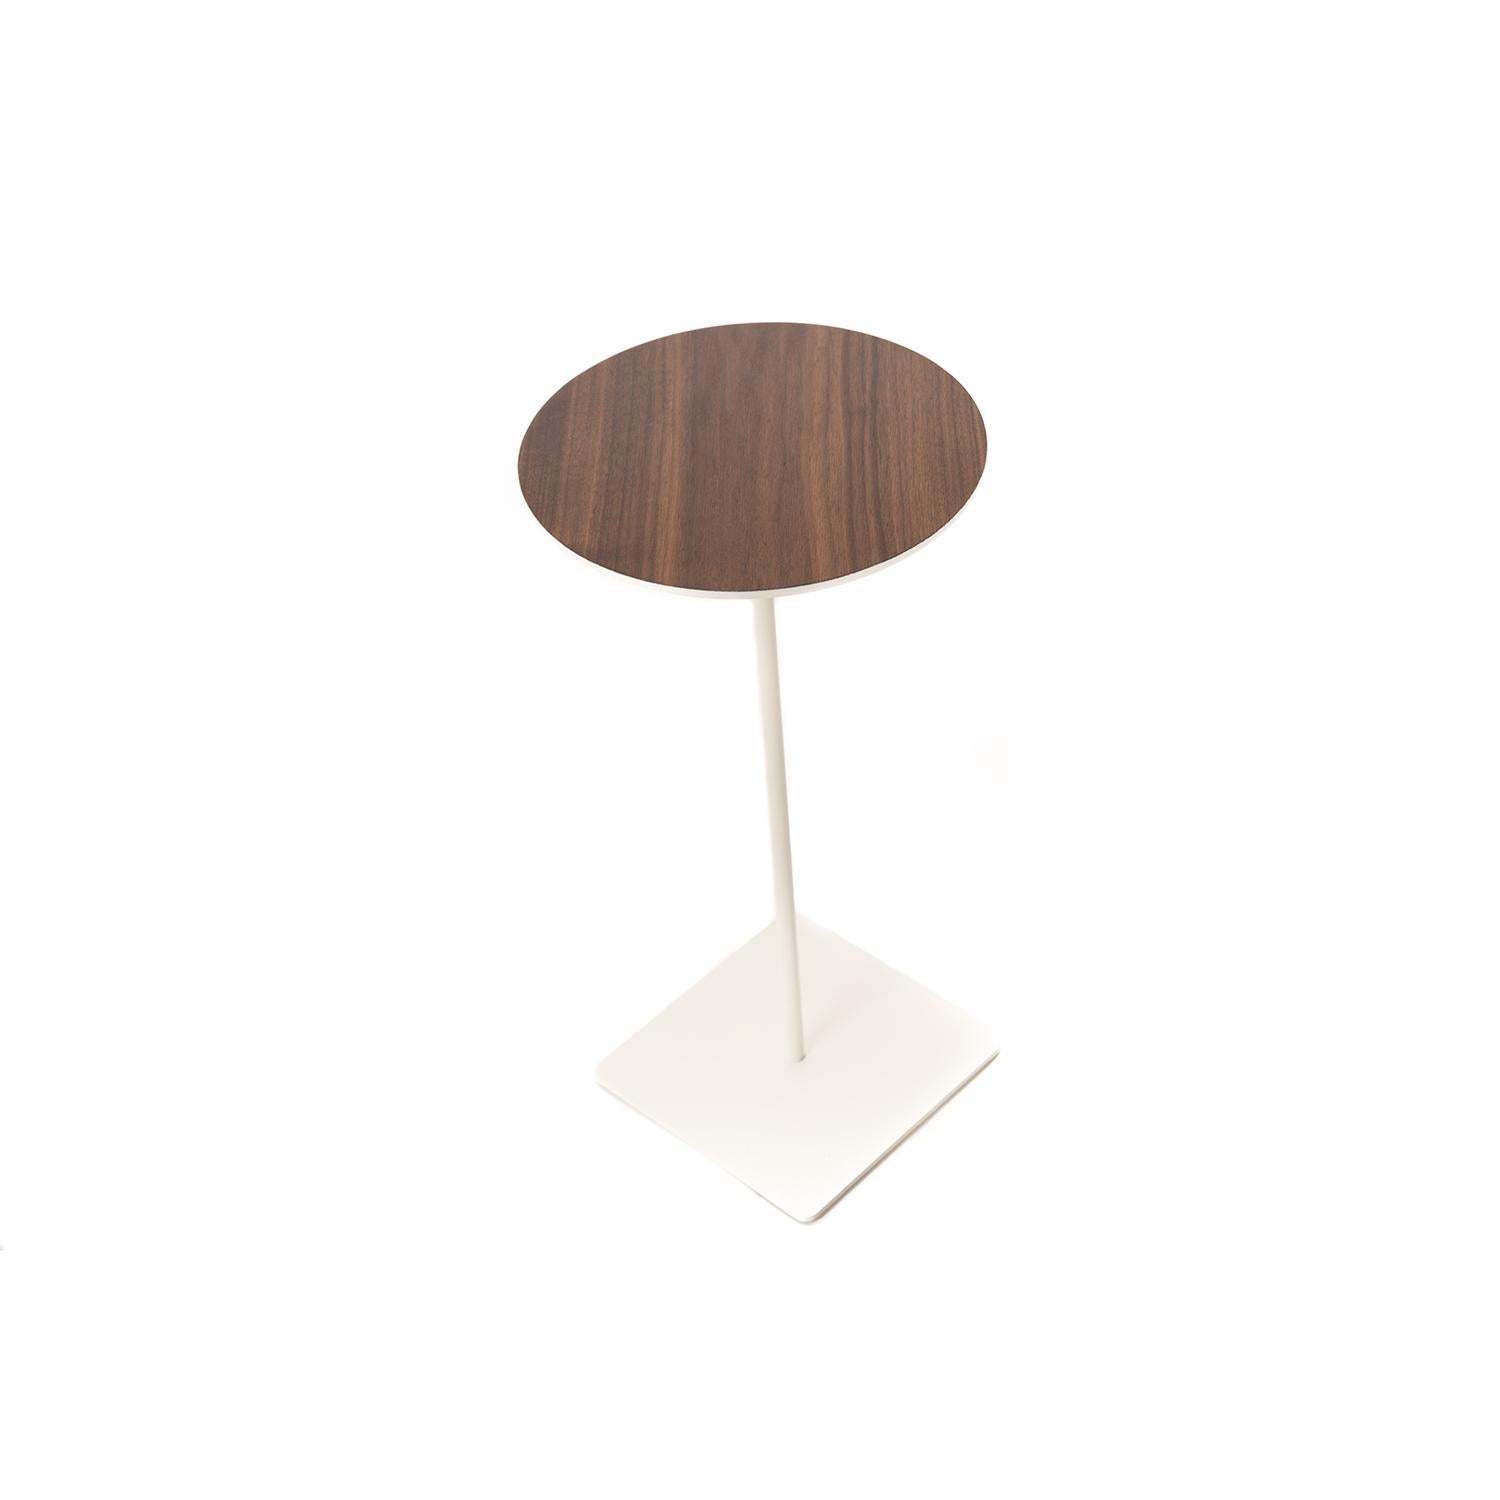 This round top walnut table sits upon a slender, white stem with a square base.